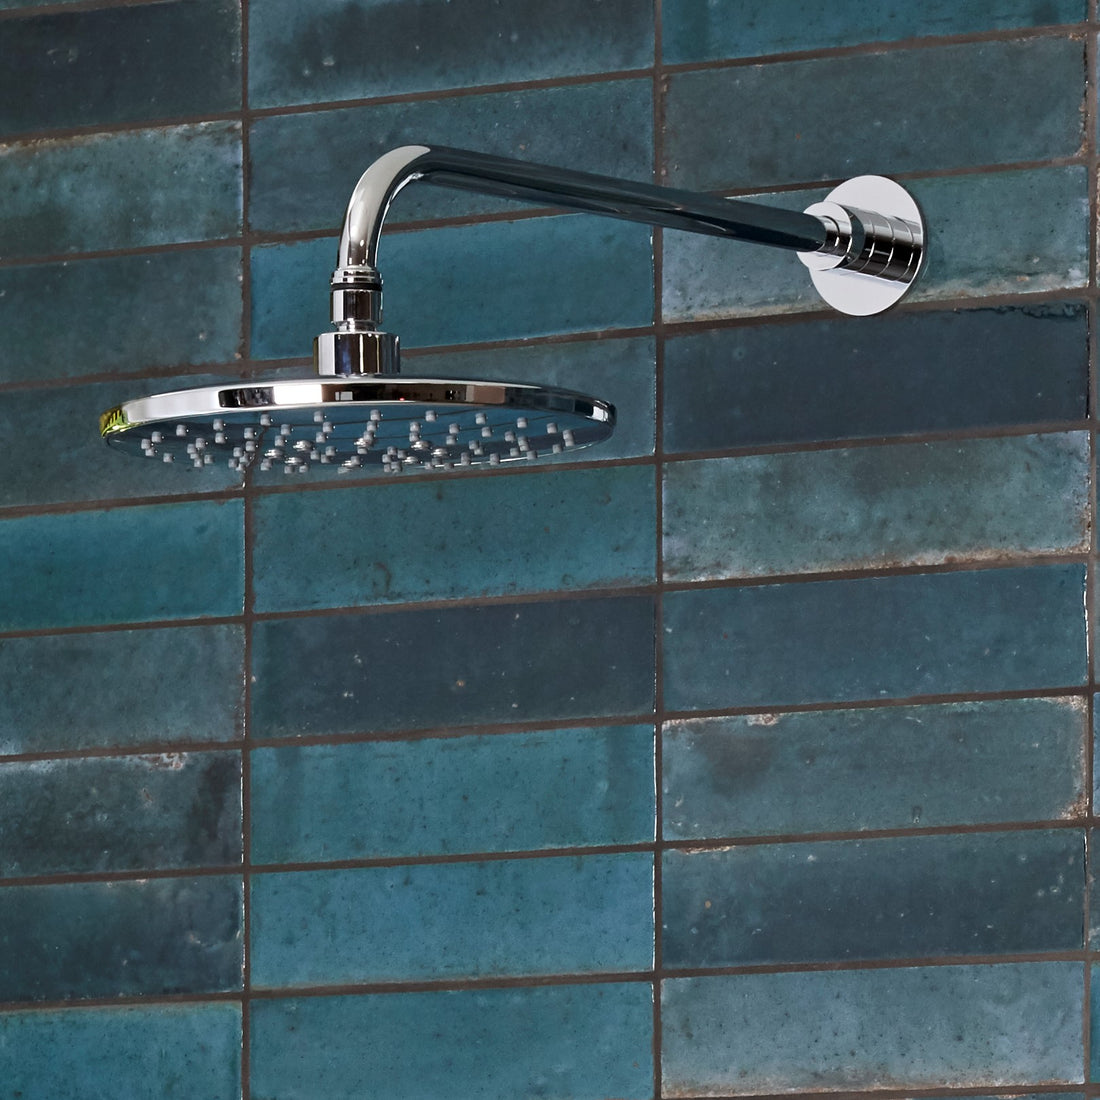 Tavistock Axiom Dual Function Push Button Shower System With Head And Outlet up close shower head against blue tiling SAX2549